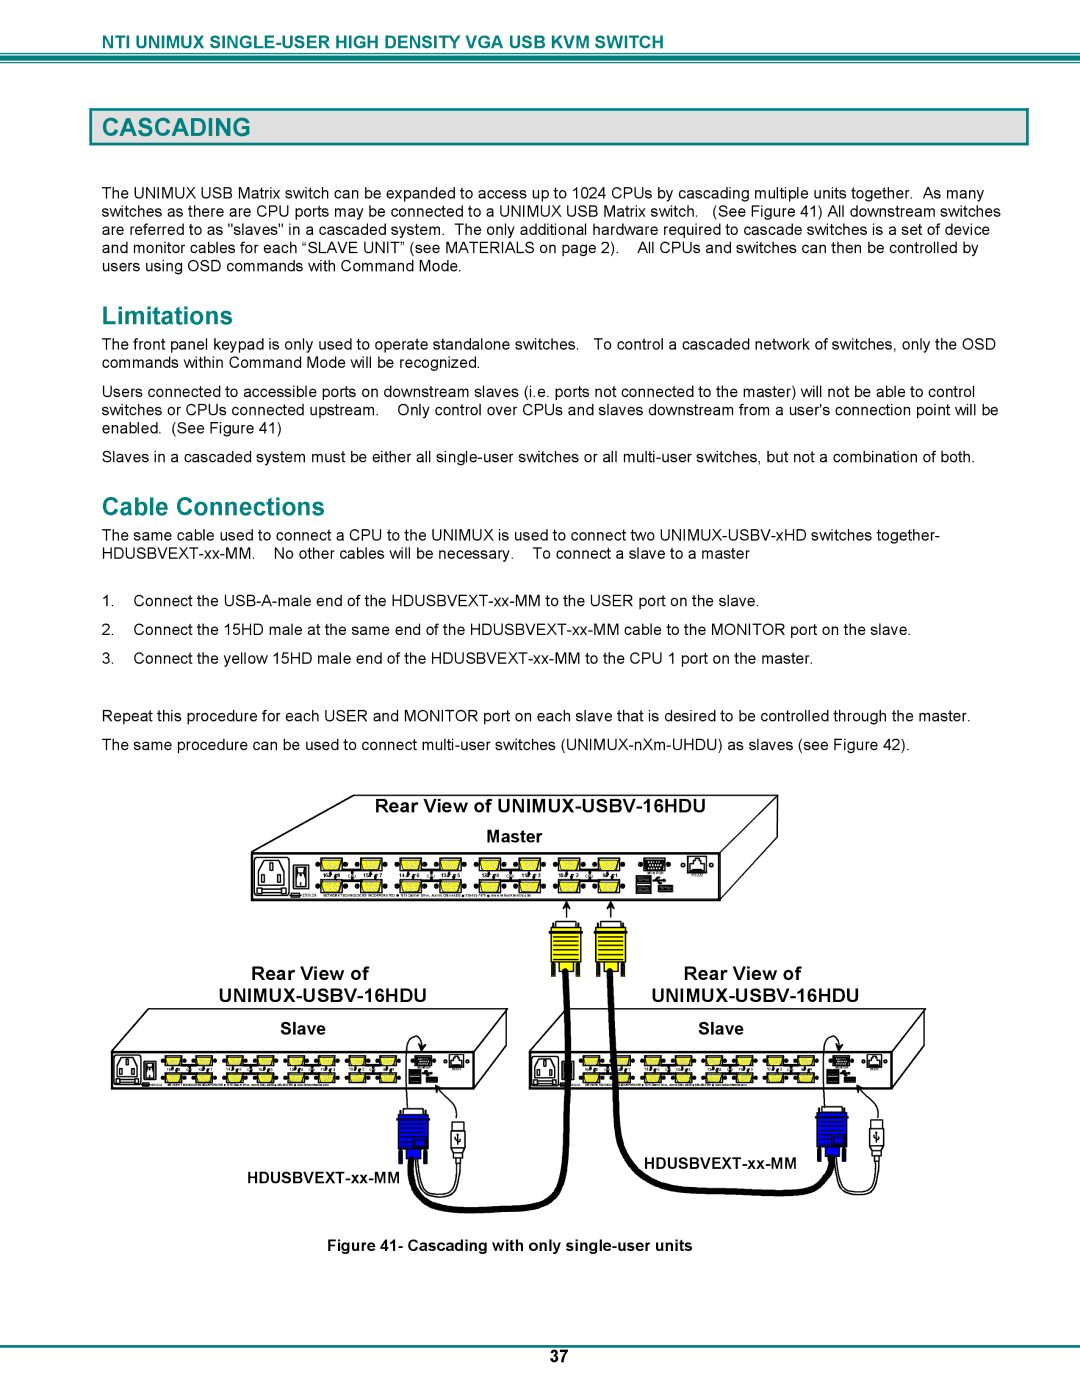 Network Technologies UNIMUXUSBVXHD operation manual Cascading, Cable Connections 